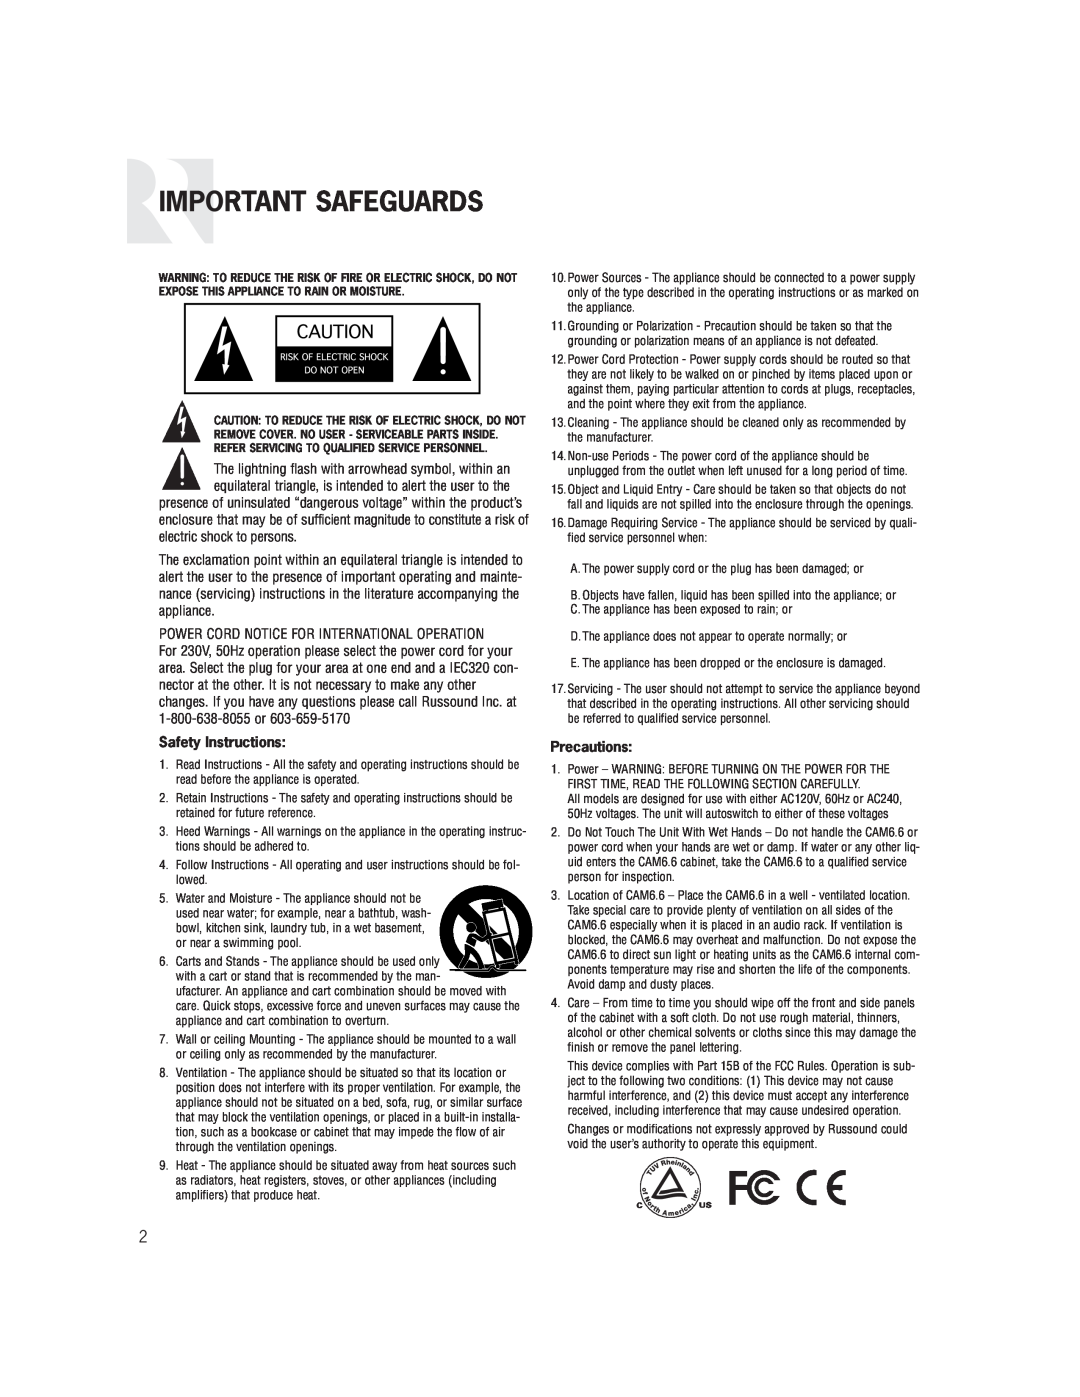 Russound CAM6.6X-S1/S2 instruction manual Important Safeguards, Safety Instructions, Precautions 